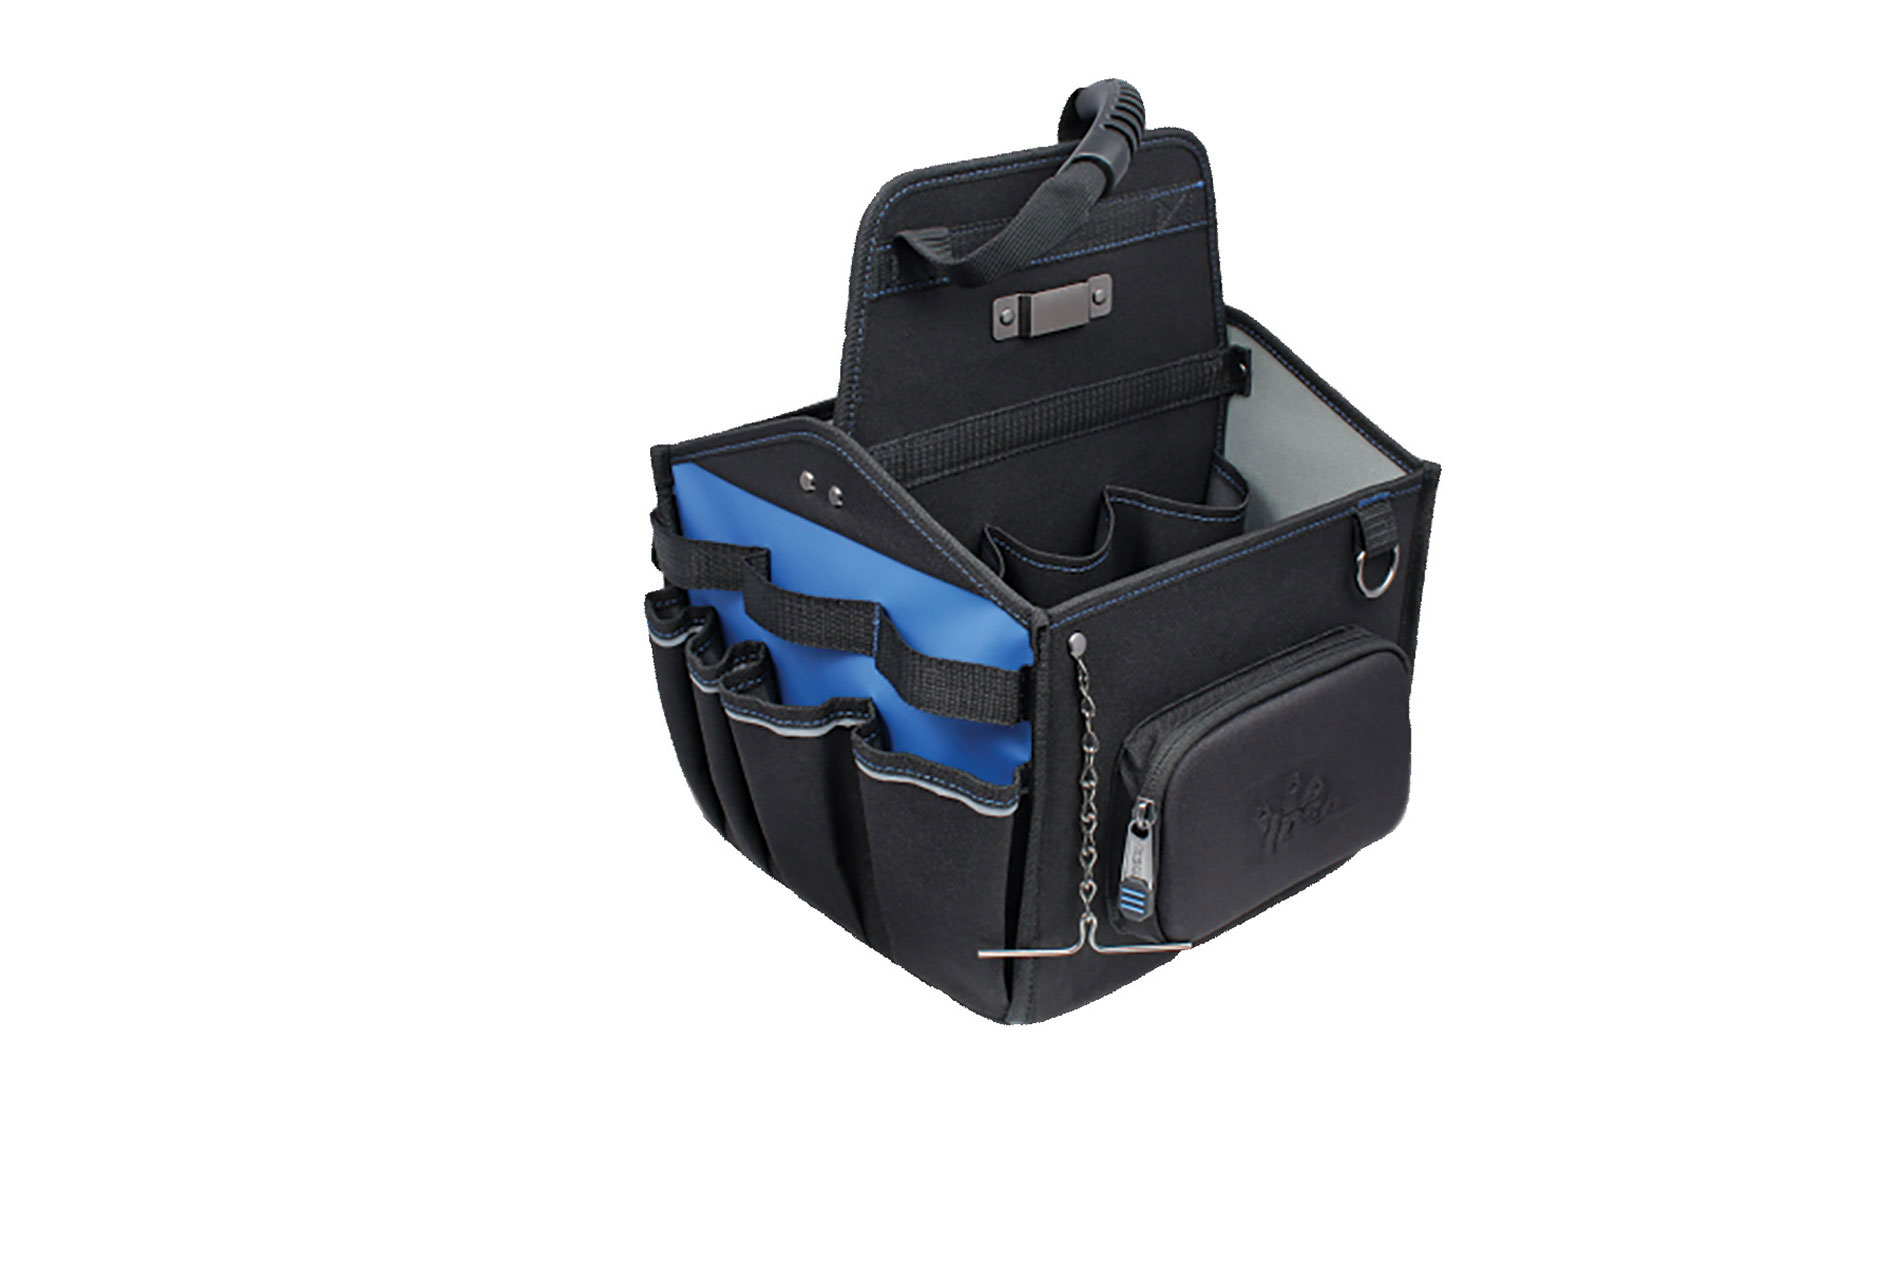 Black and blue tool carrier with pockets. Image by Ideal Industries.